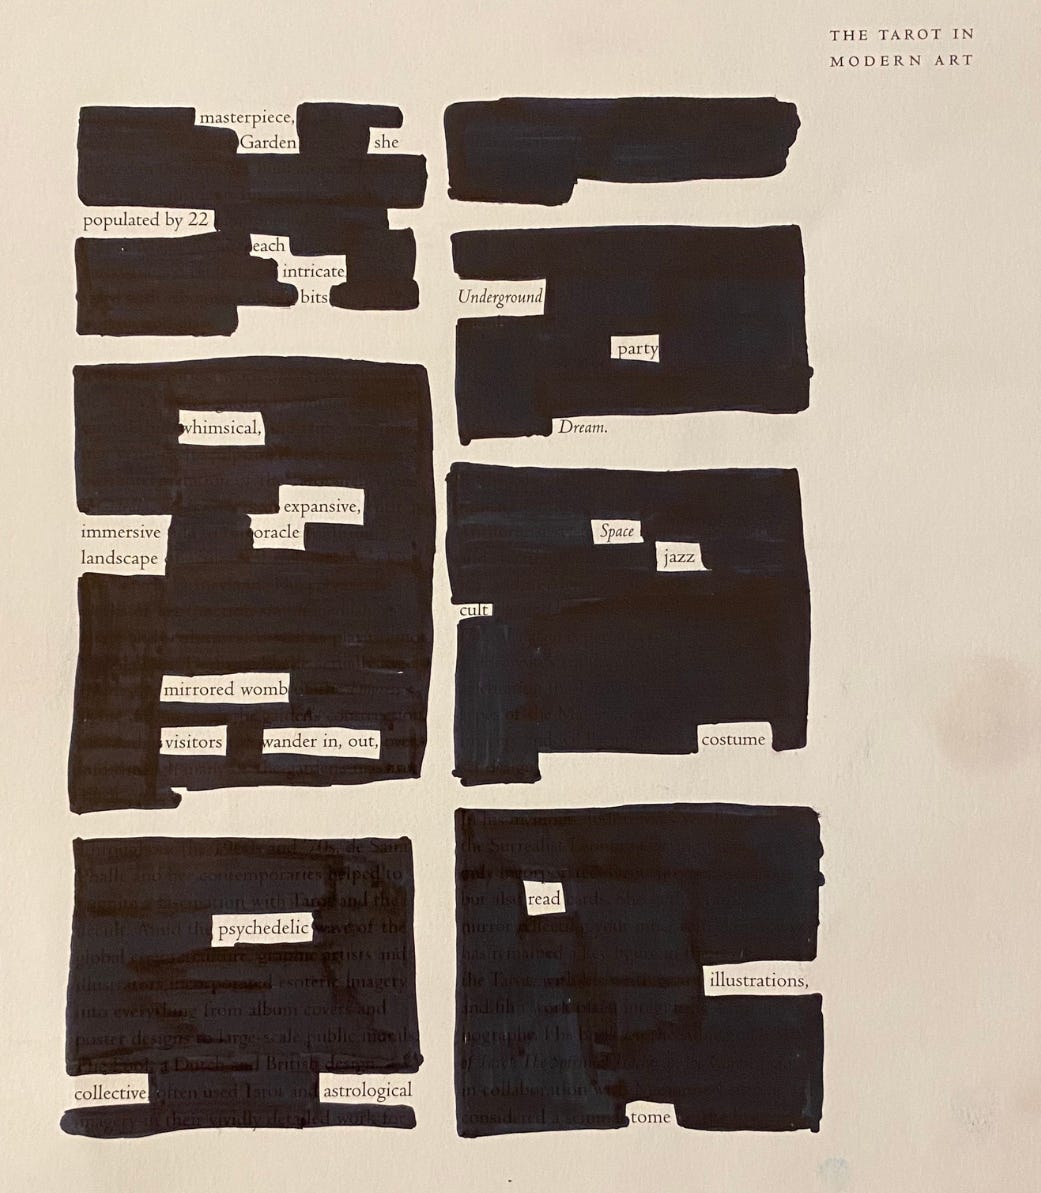 A page from a Tarot encyclopedia with most of the words blacked-out with permanent black marker, leaving only a few words remaining to create a poem.